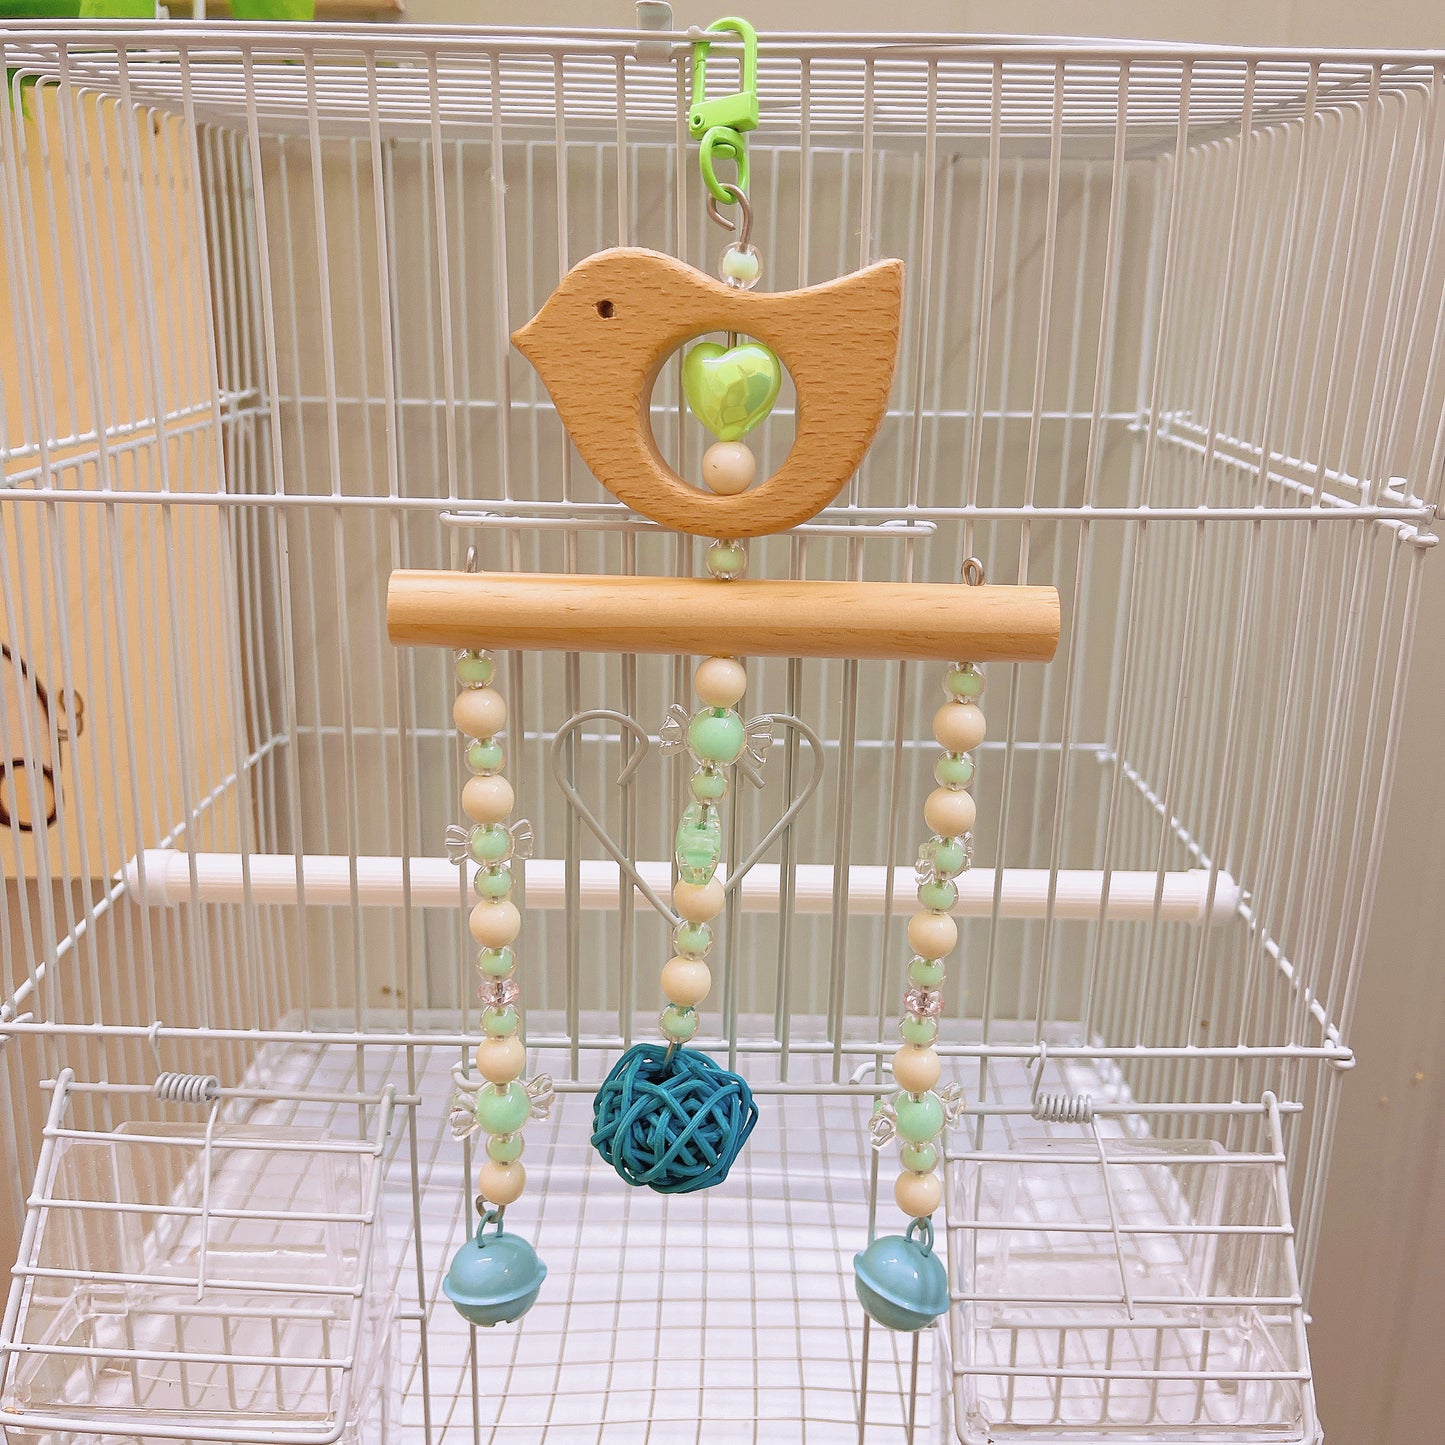 Handcrafted Indoor Colorful Pet Birds Chew Toys, Bird Entertainment Kits, Hanging Ornamental for Cage Decoration, Suitable for Parakeet/Budgie, Cockatiel, Finch, Lovebird, Monk Parakeet, Dove, Parrotlet, Sparrow